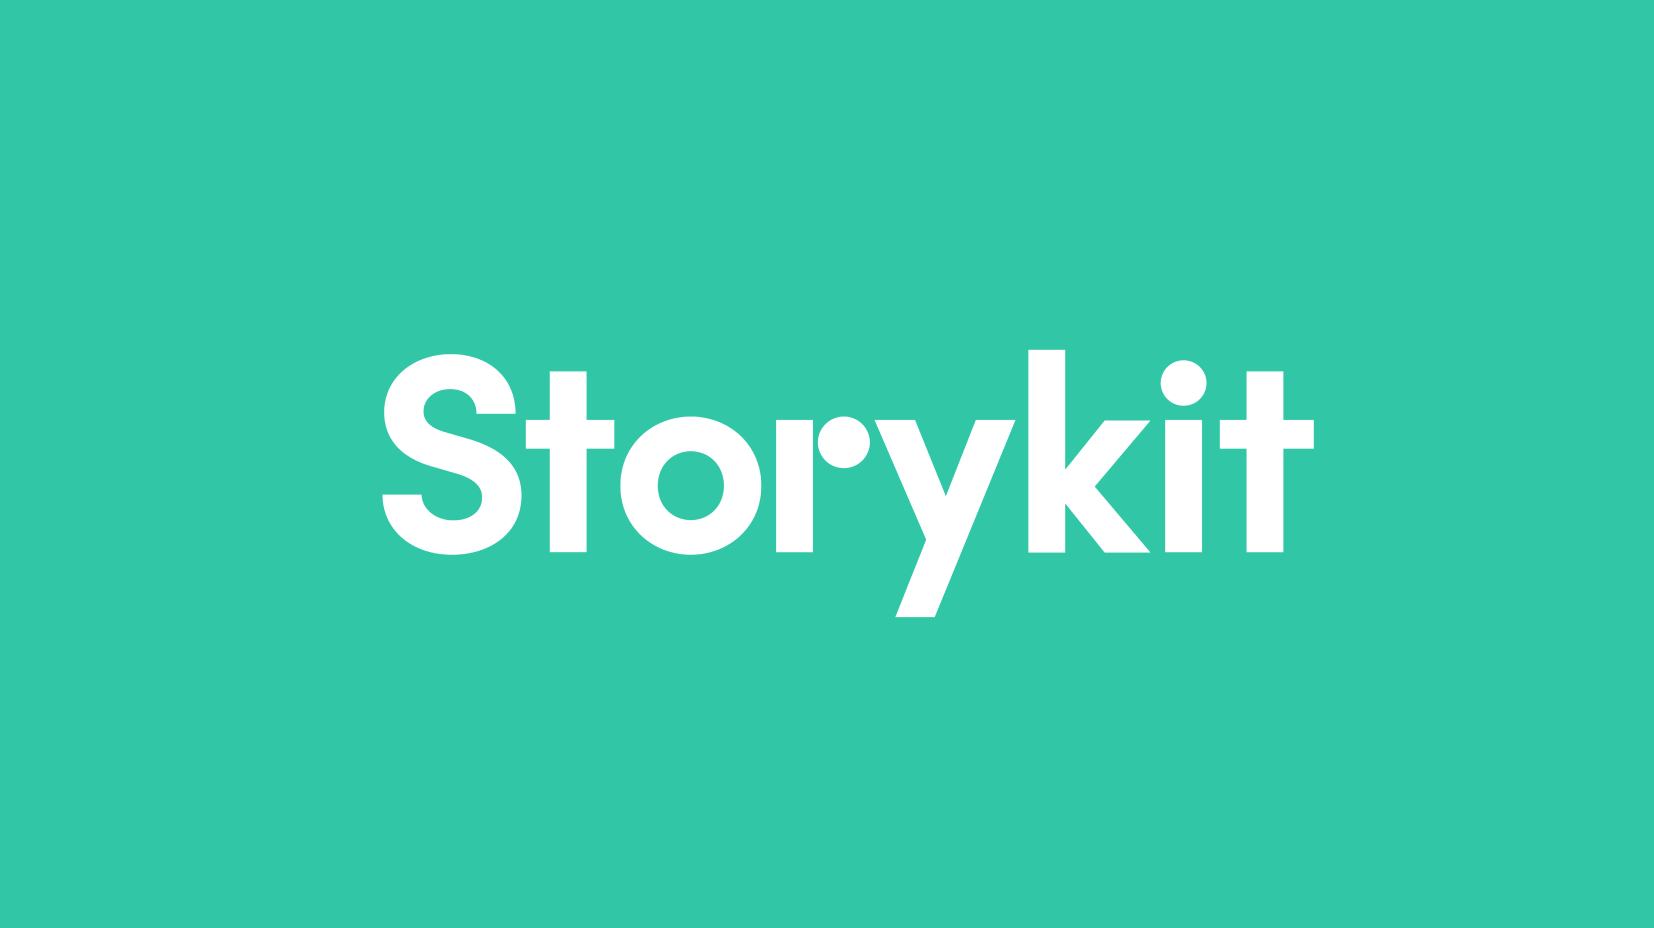 Tech & Product DD | Growth | Code & Co. advises Expedition Growth Capital on Storykit